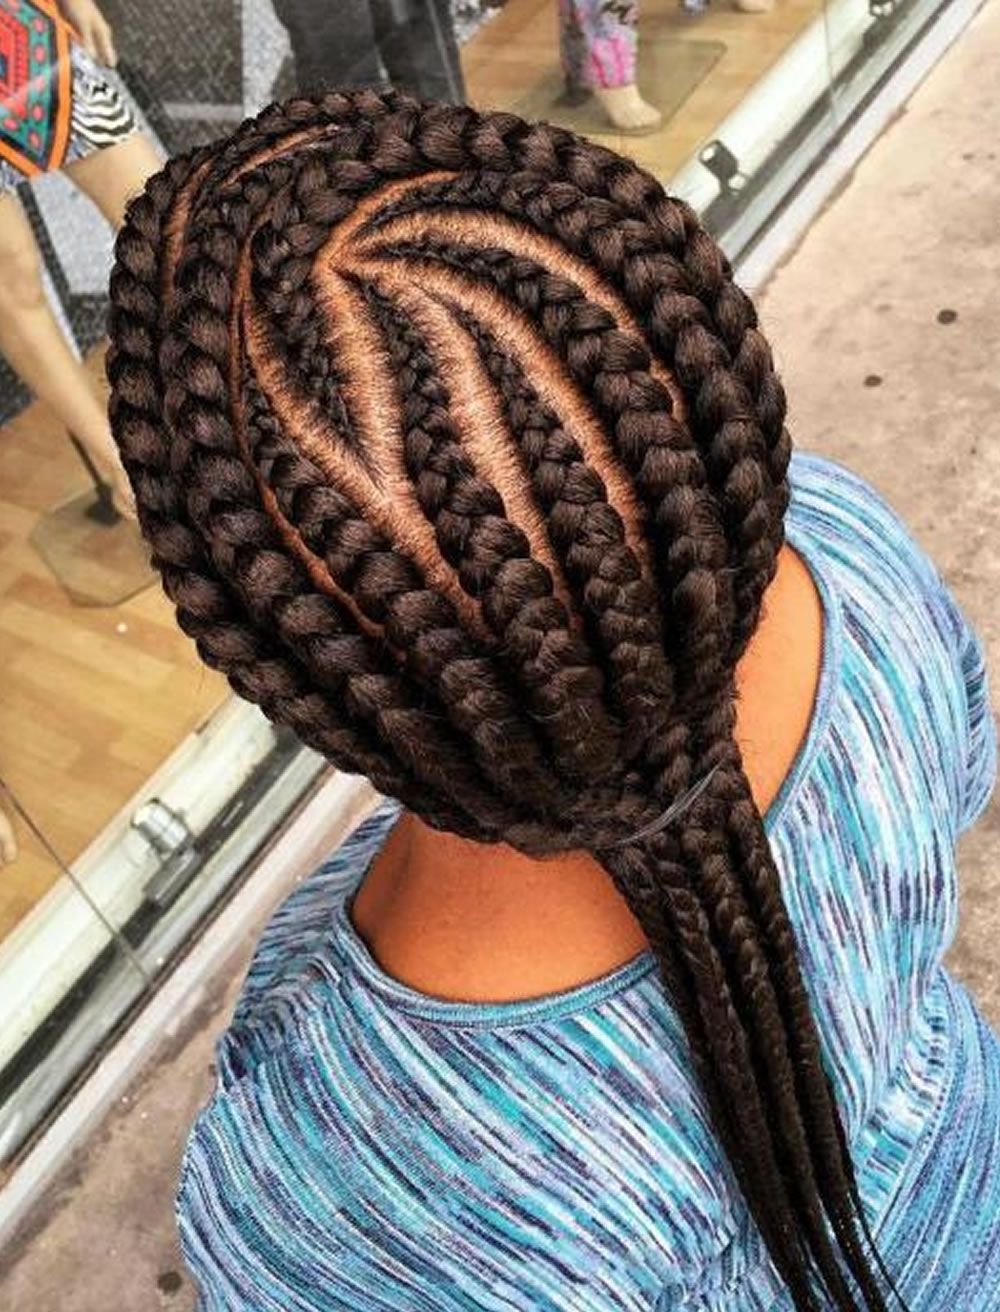 Newest Cornrows Hairstyles Without Extensions Intended For 20 Best African American Braided Hairstyles For Women 2017  (View 14 of 15)